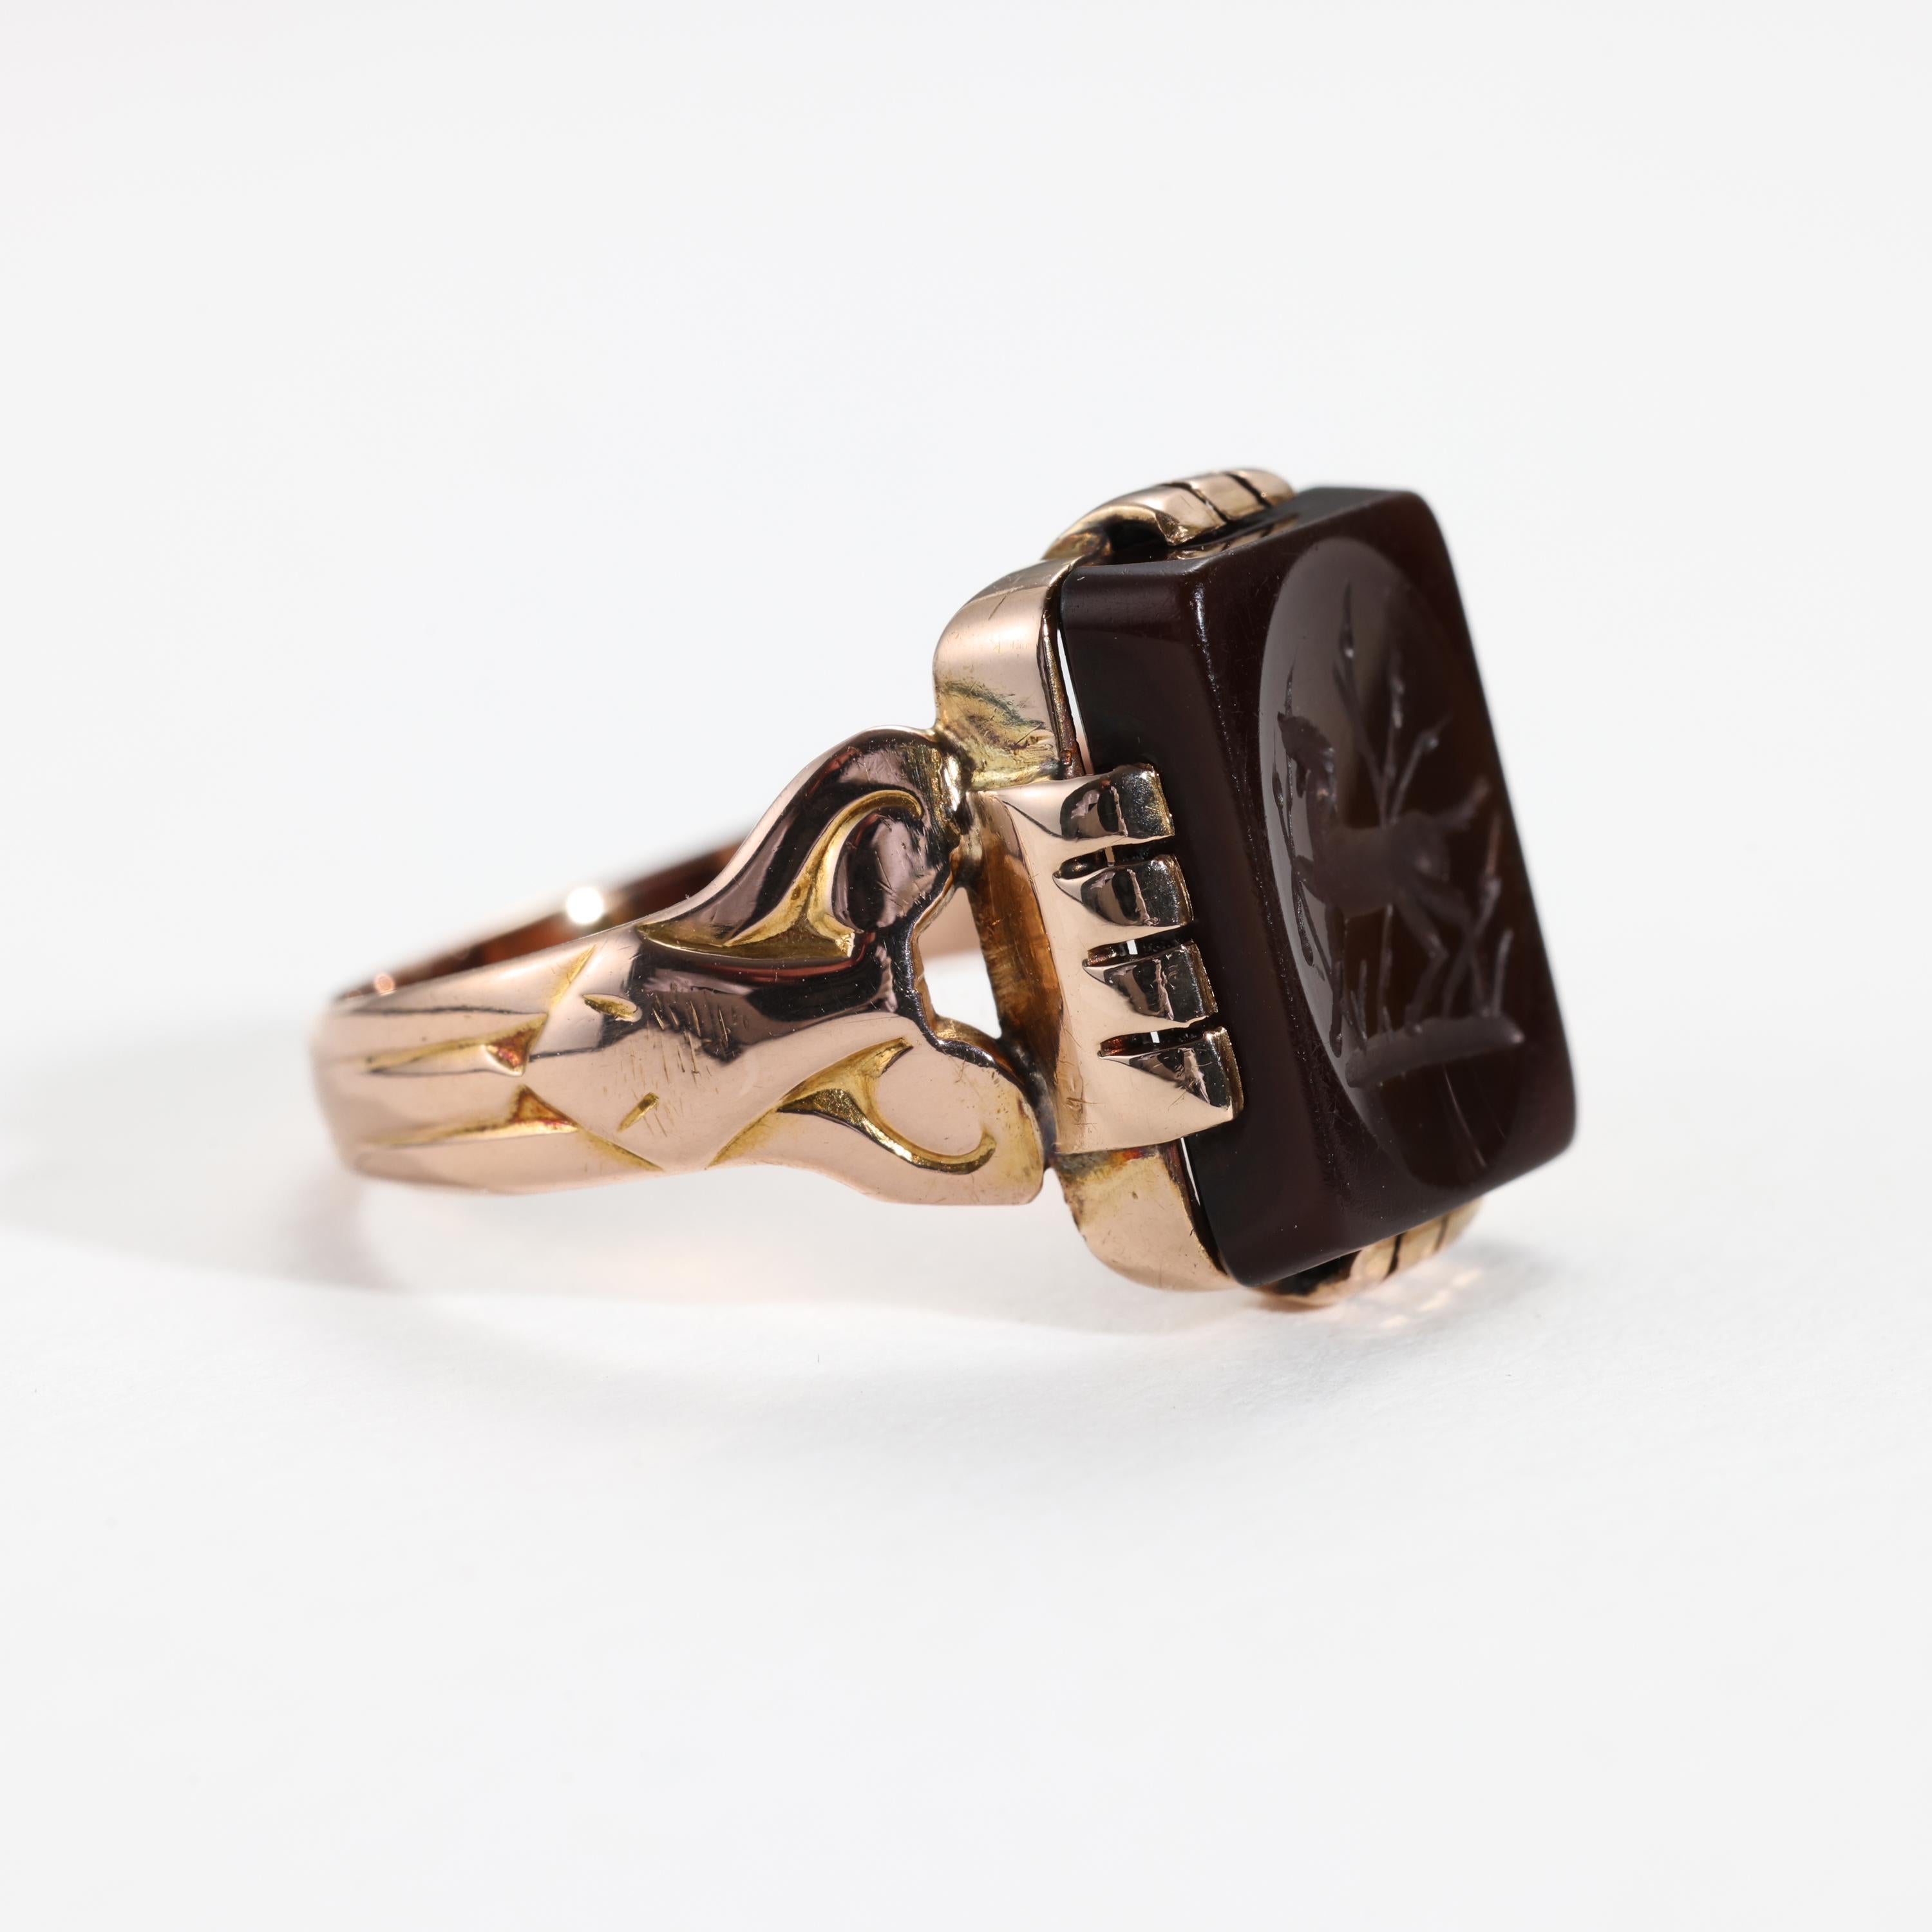 18K Ring Intaglio Engraved Sardonyx Depicting Horse, English, Circa 1850 In Excellent Condition For Sale In Southbury, CT